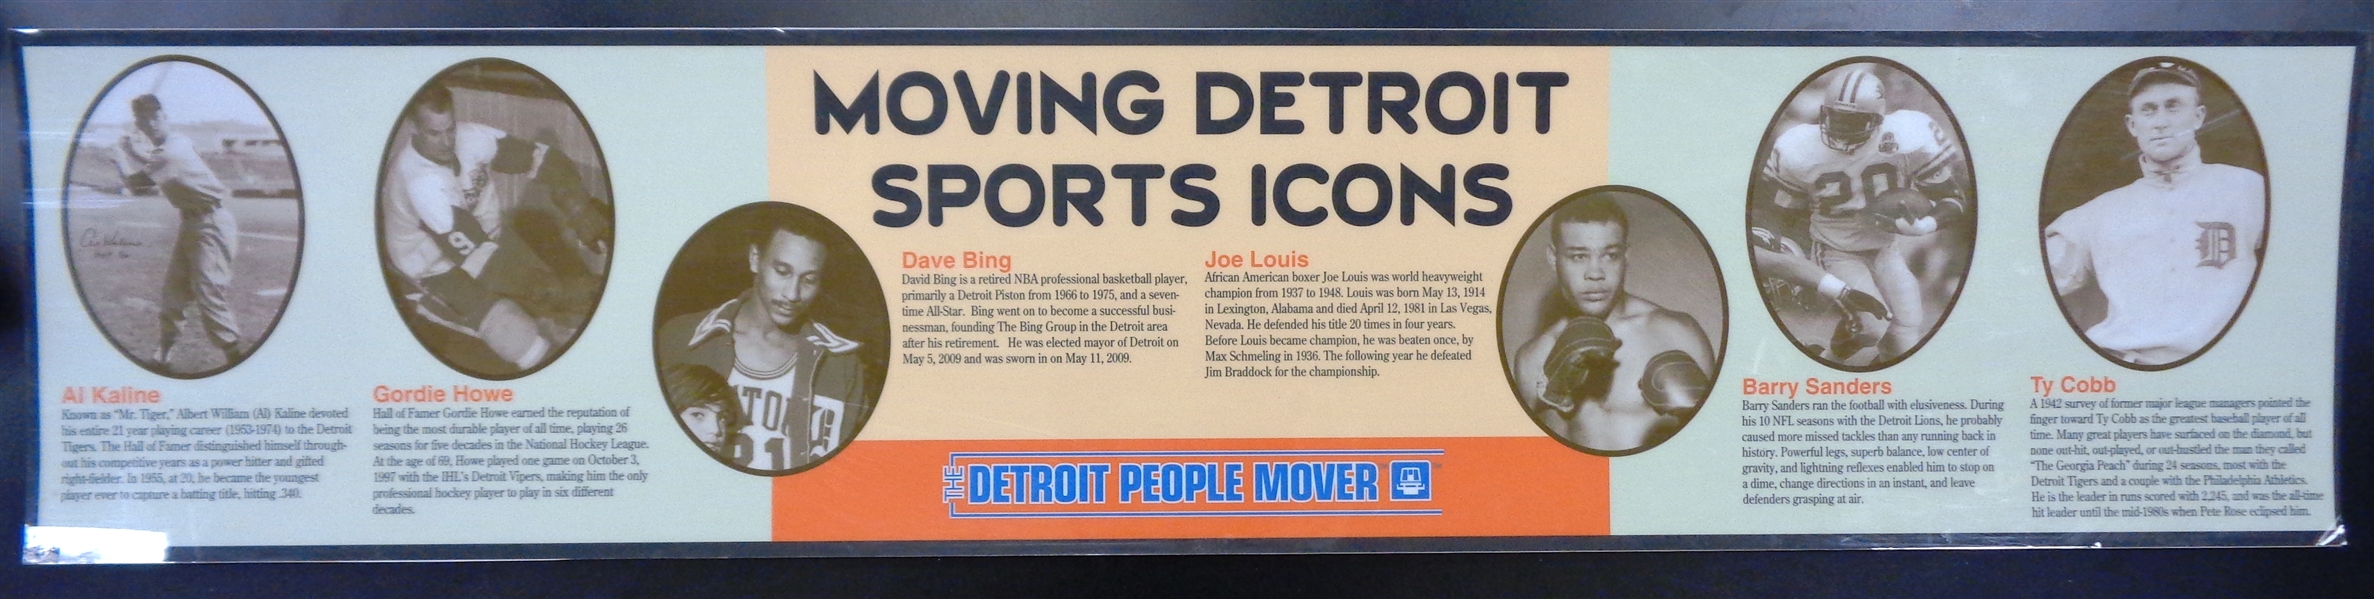 Original People Mover Detroit Sports Icons 11x49 Laminated Sign